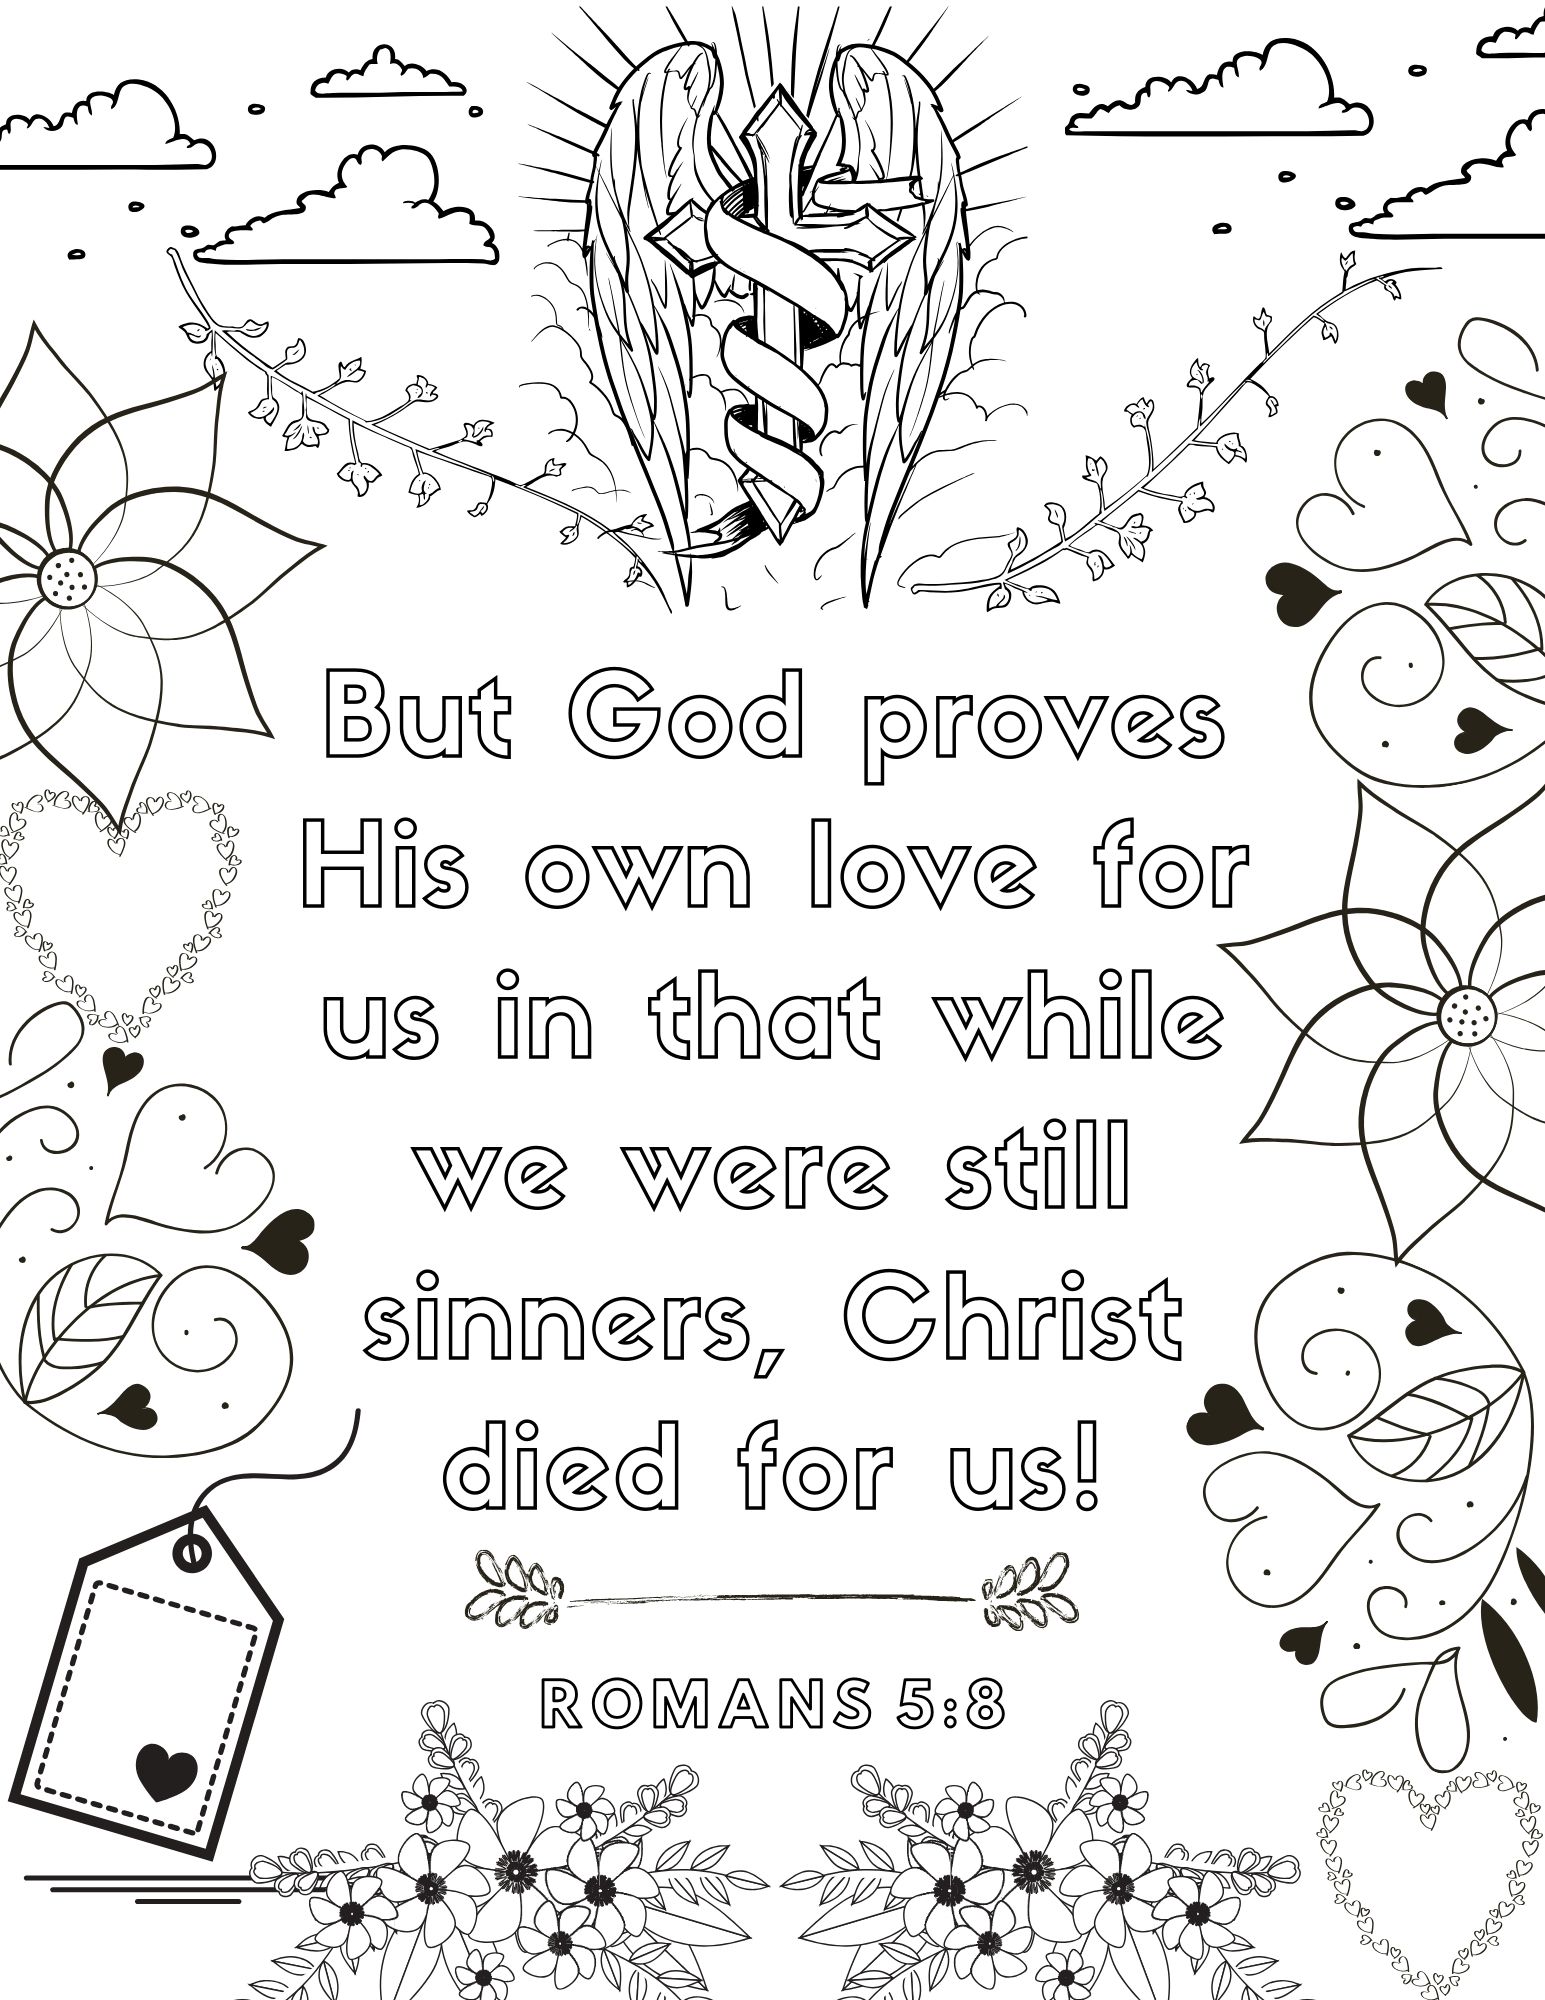 coloring-pictures-with-bible-verses-symbol-all